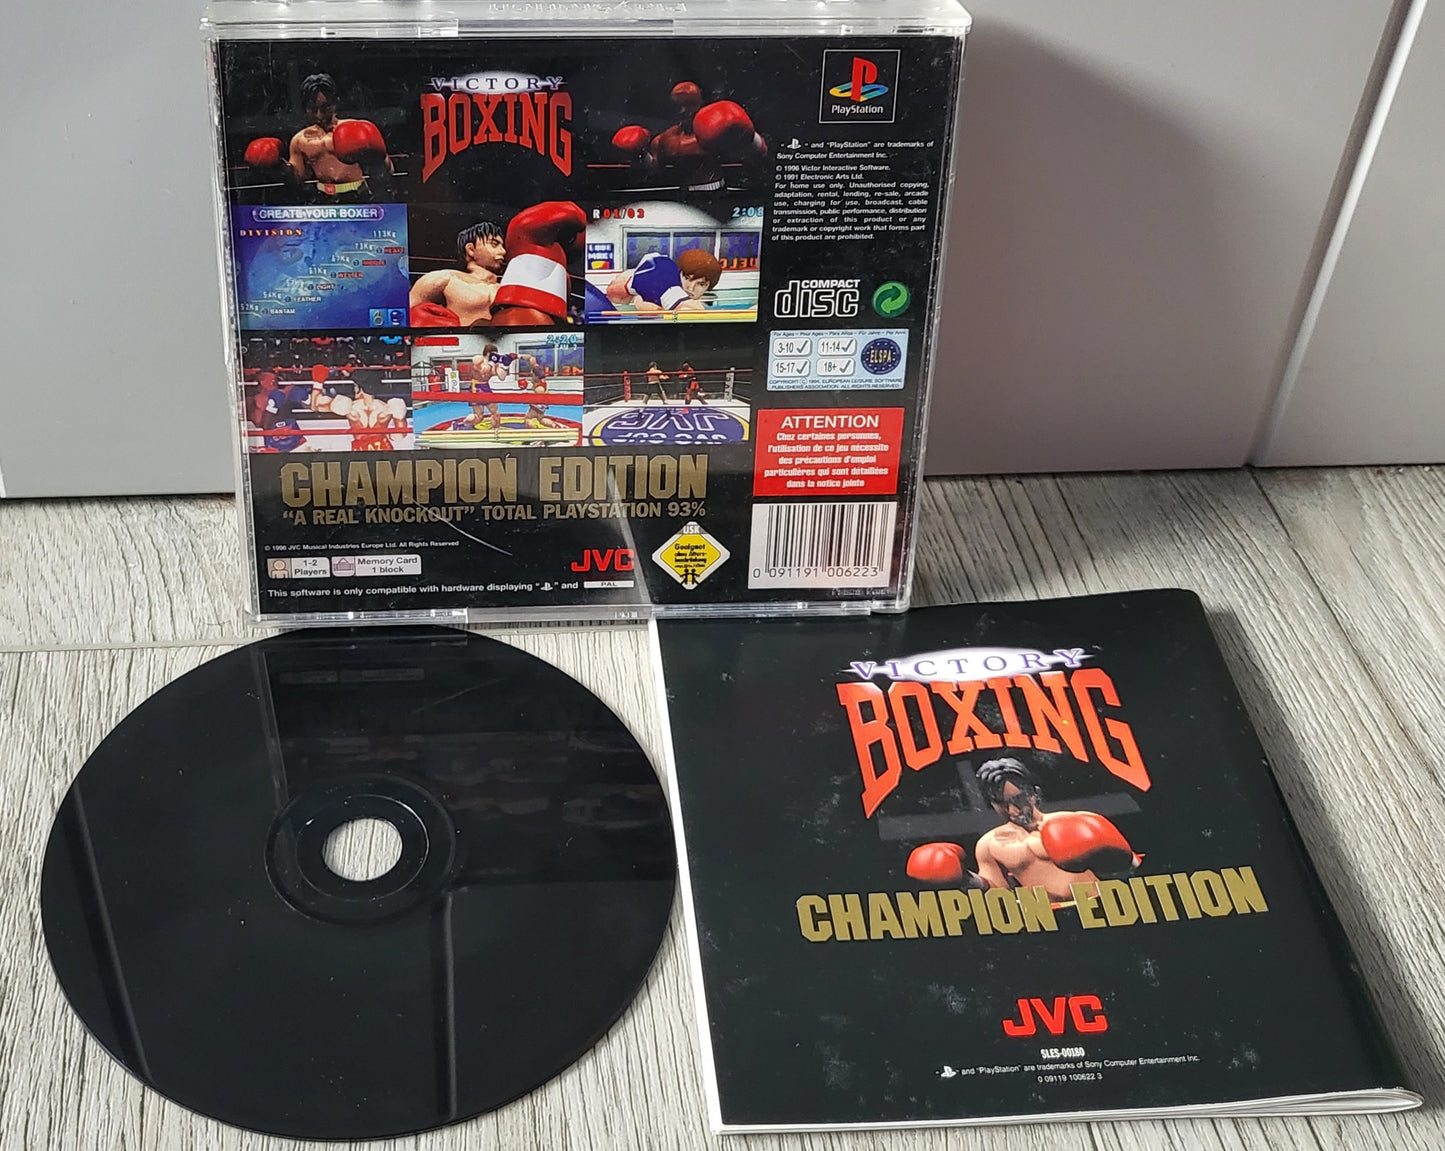 Victory Boxing Champion Edition Sony Playstation 1 (PS1) Game